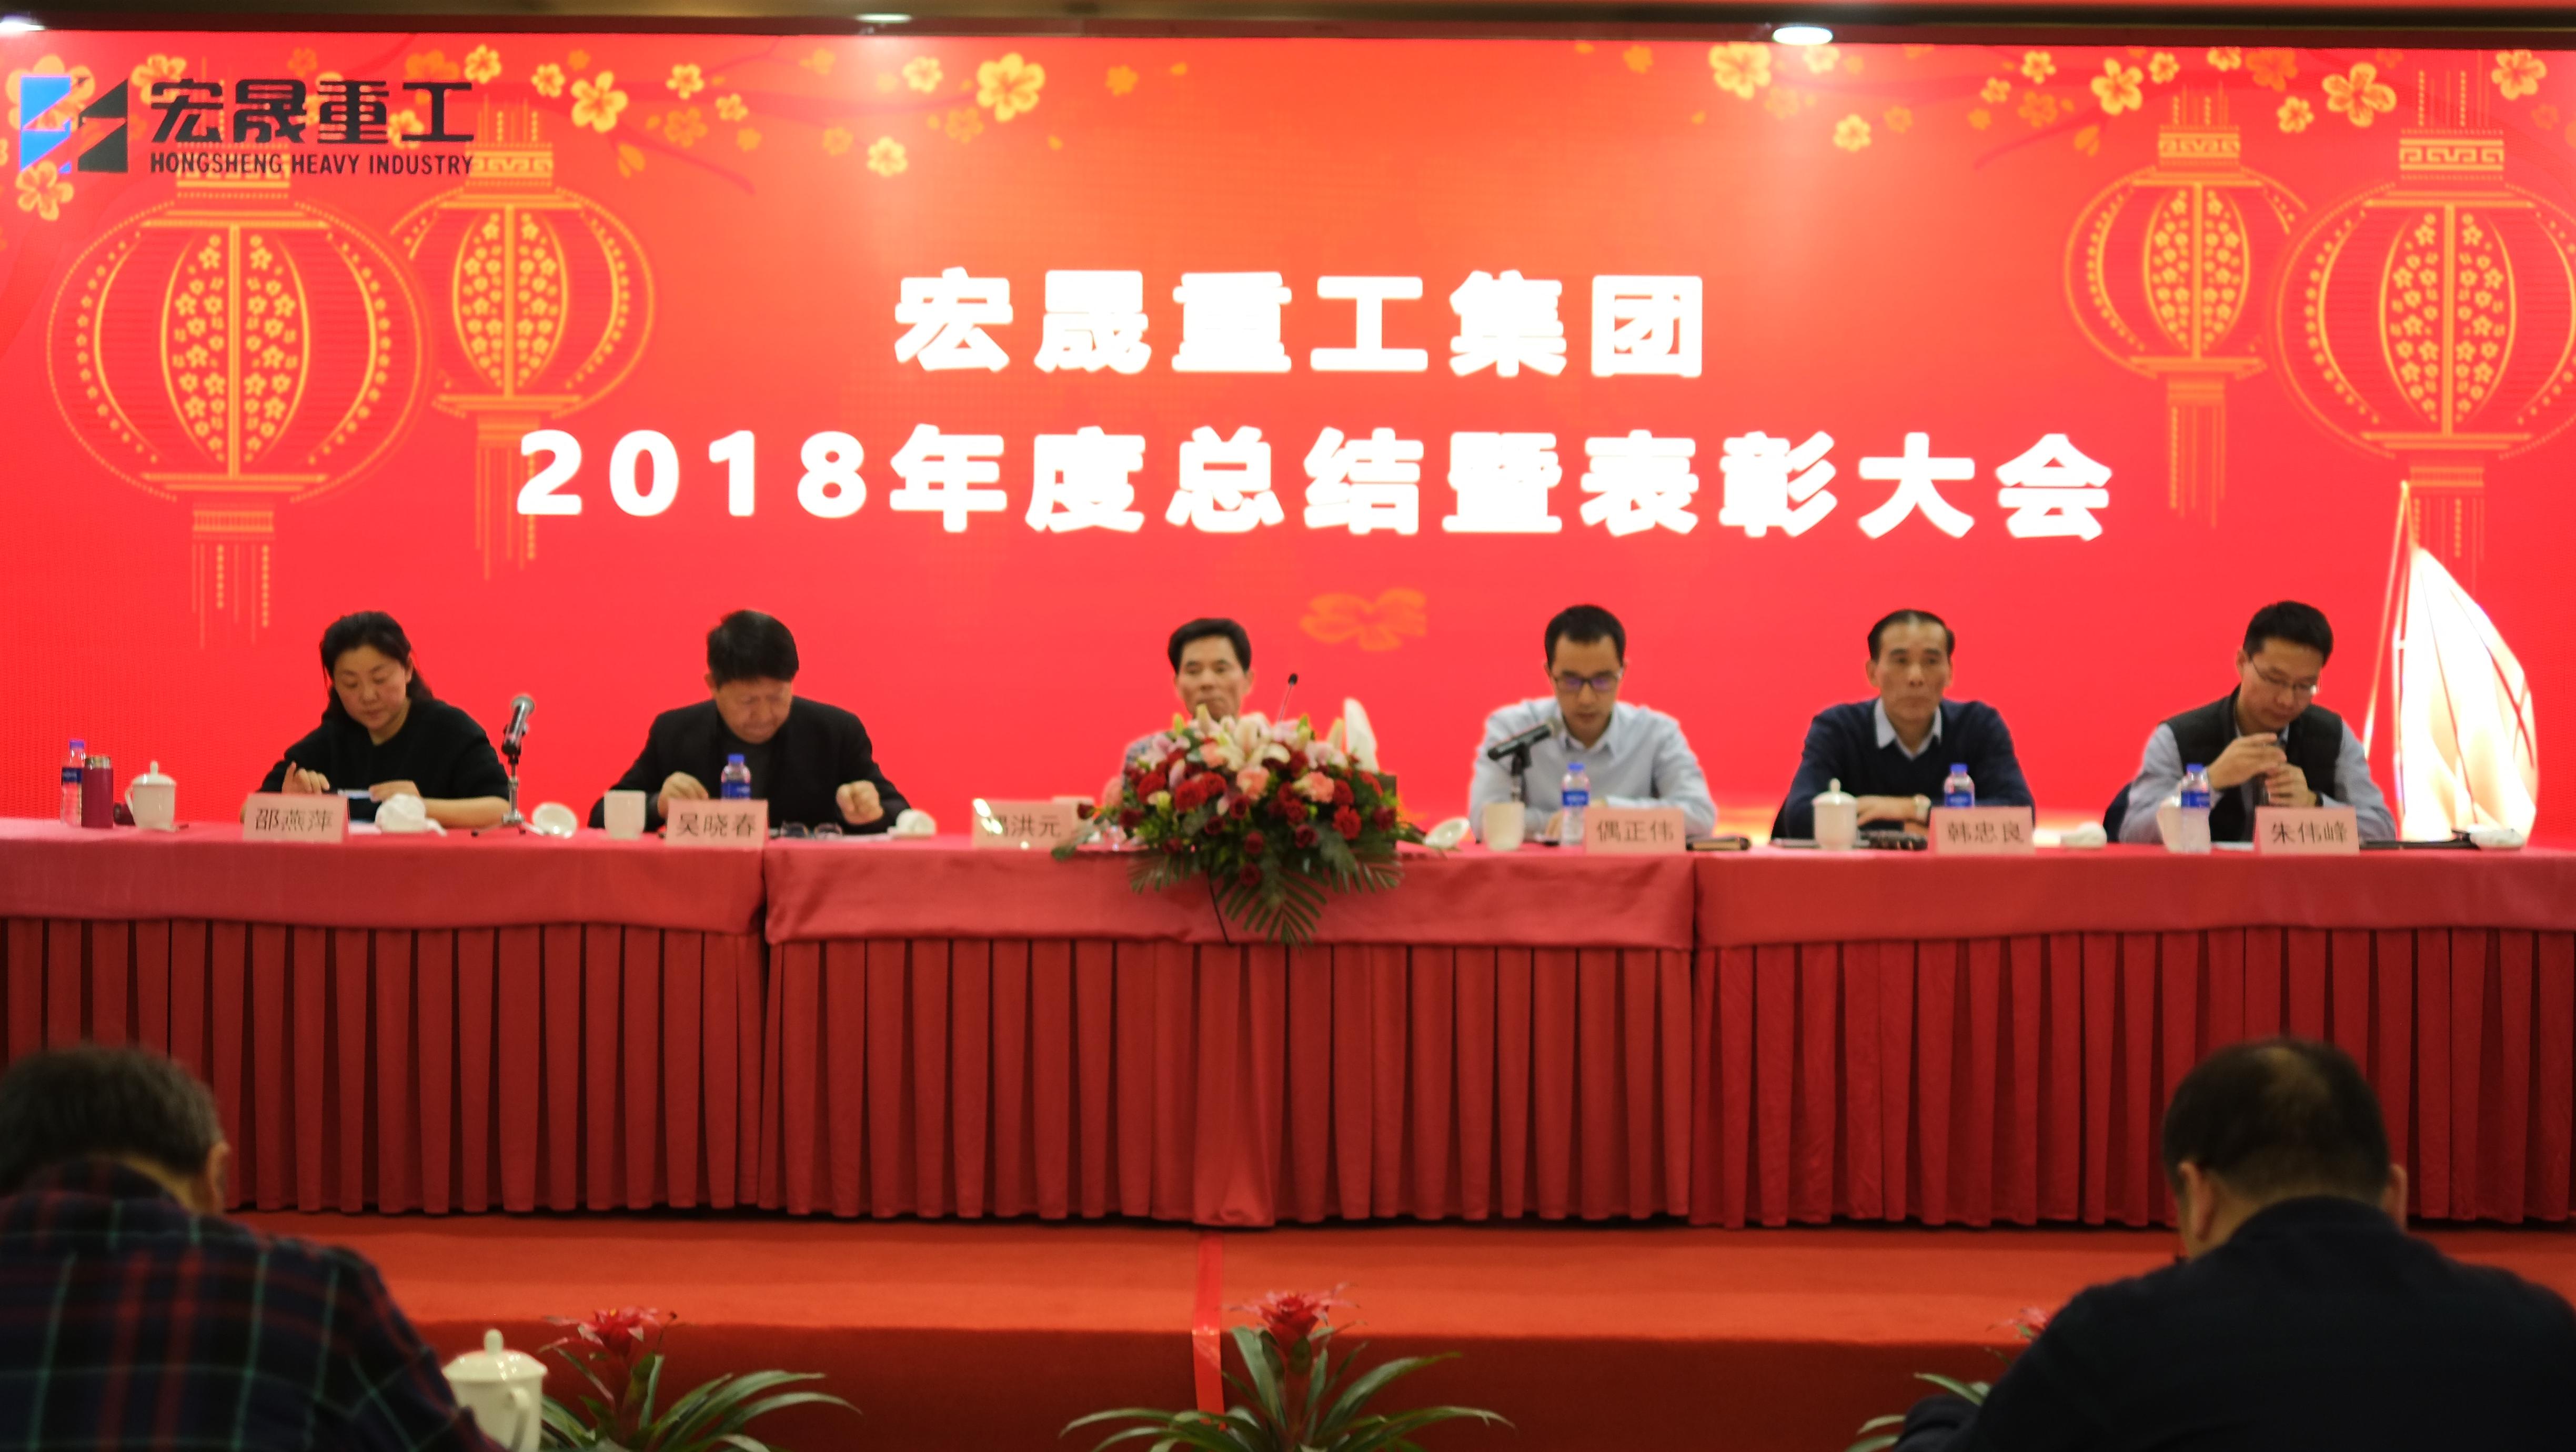 Annual Summary and Commendation Conference of Hongsheng Group for 2018